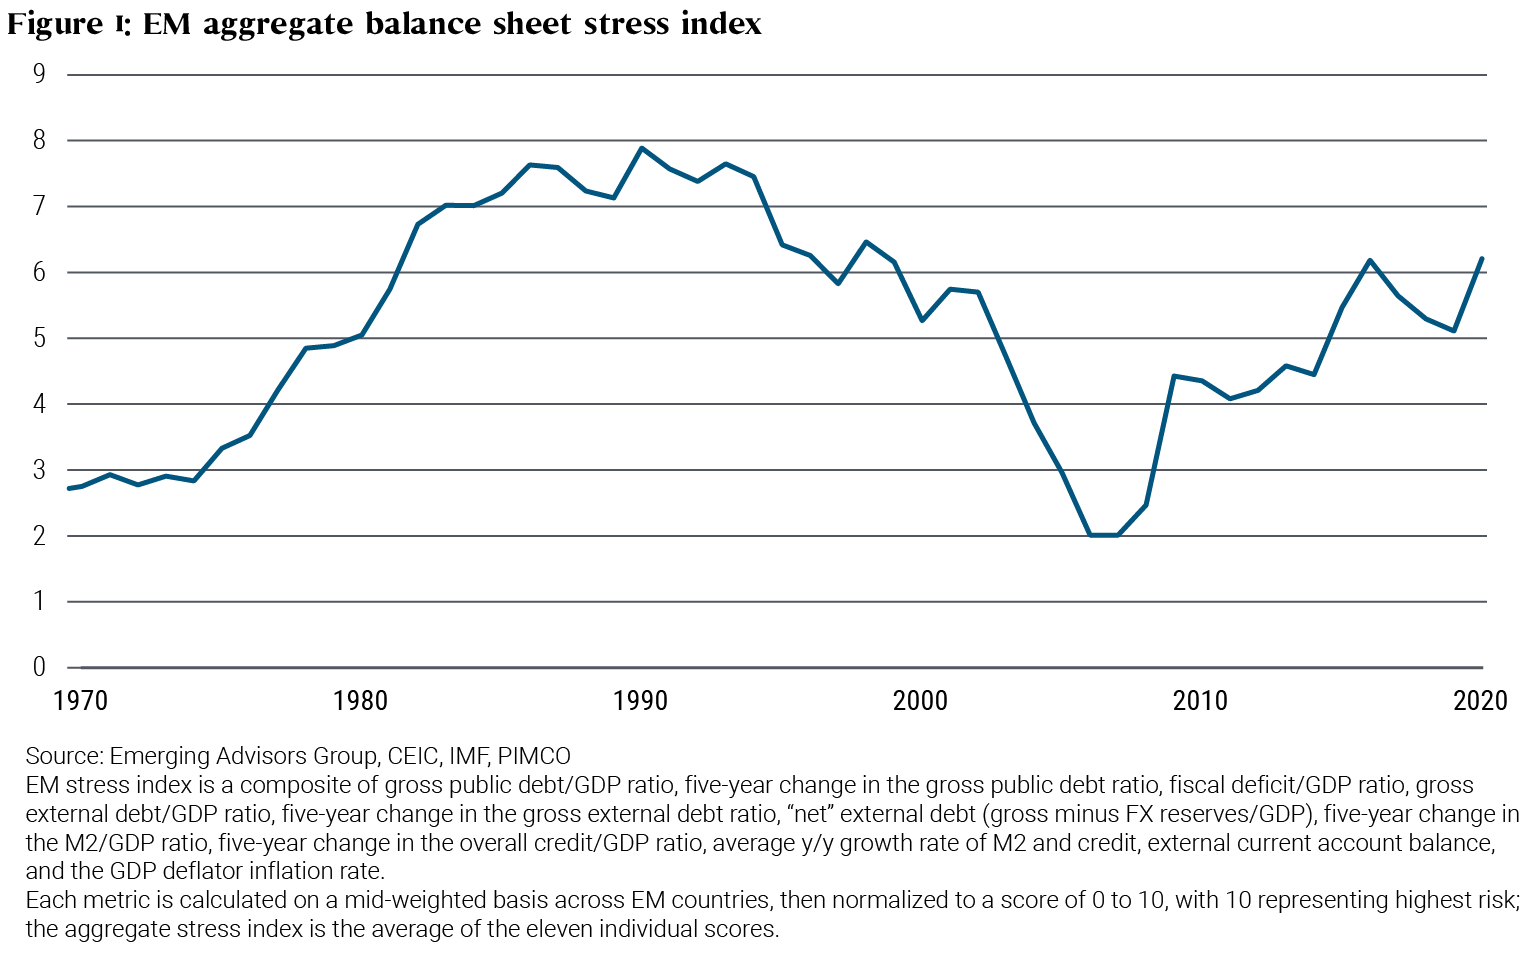 This line graph shows the emerging markets stress index from 1970 through 2020. In 1970 through 1974 the stress index hovered between 2.8 and 2.9. In 1975 it began to climb, peaking at 7.9 in 1990, before trending down to 2.0 in 1990 and 1991. It began to climb in 1992 and sat at 6.2 in 2020, the most recent measurement.